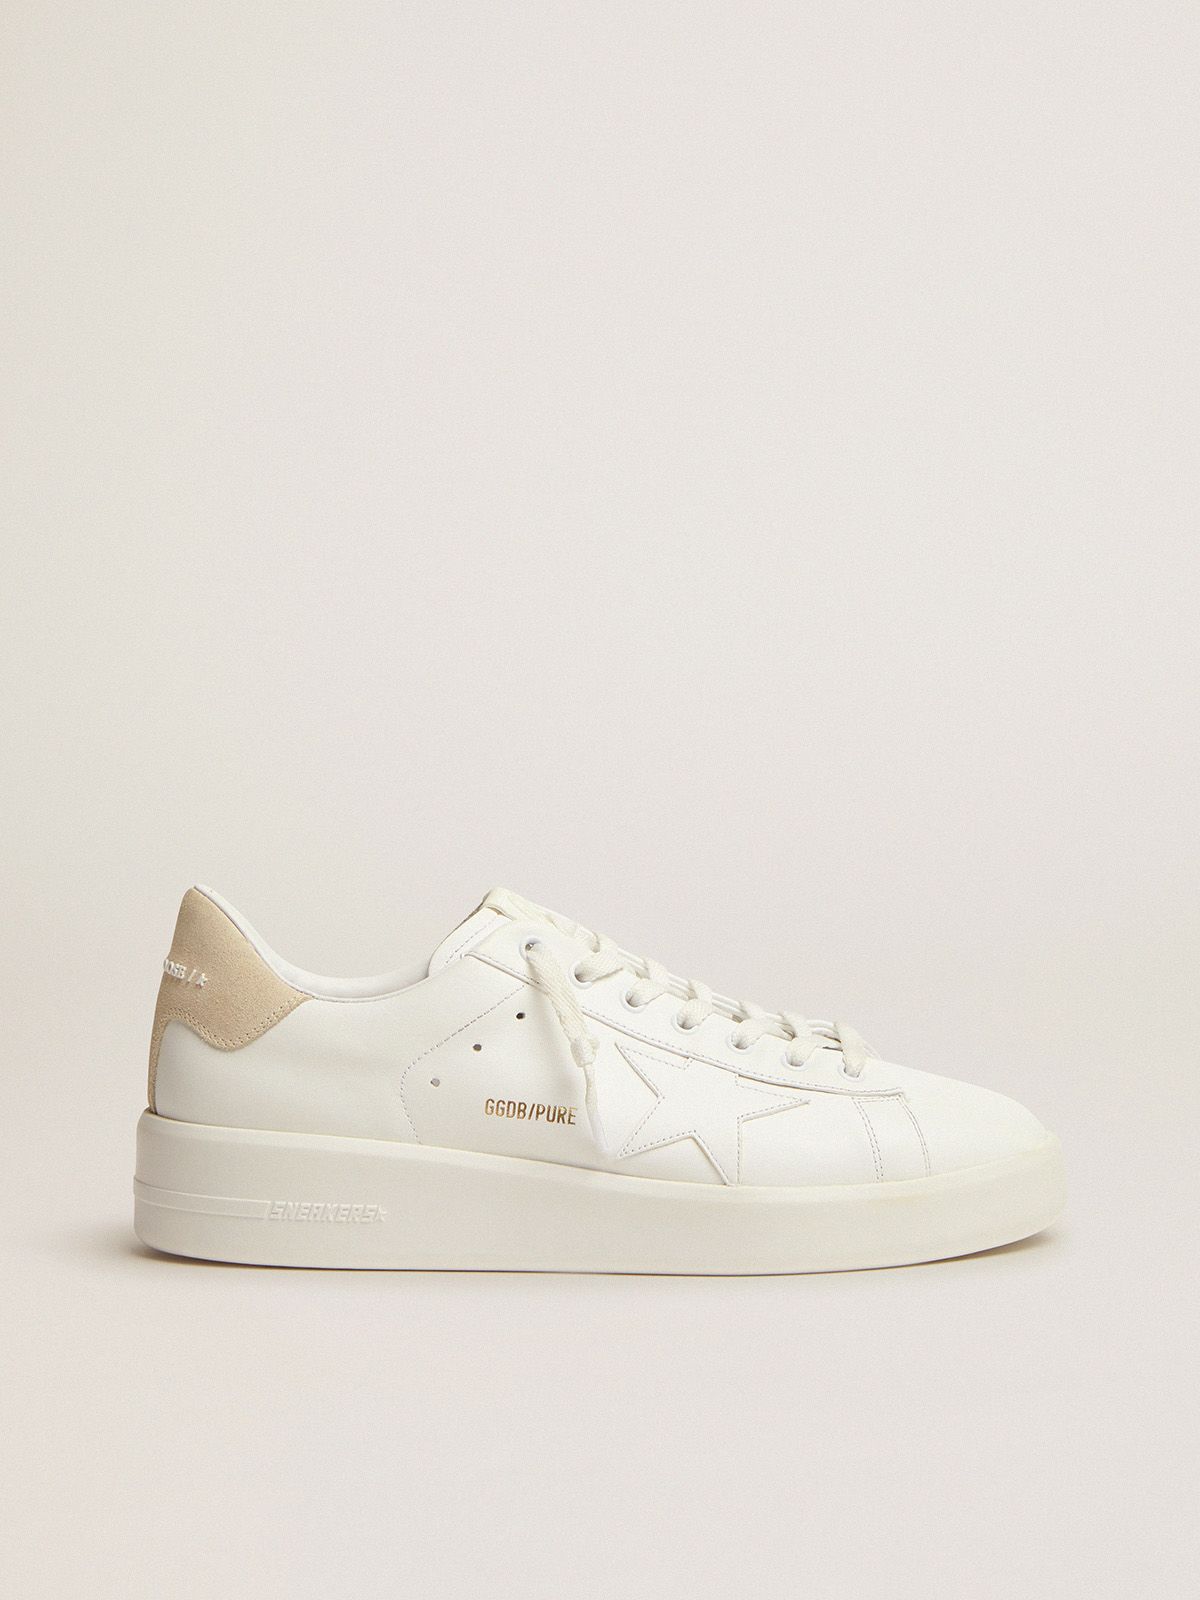 golden goose white leather Purestar with cream suede tab sneakers in heel